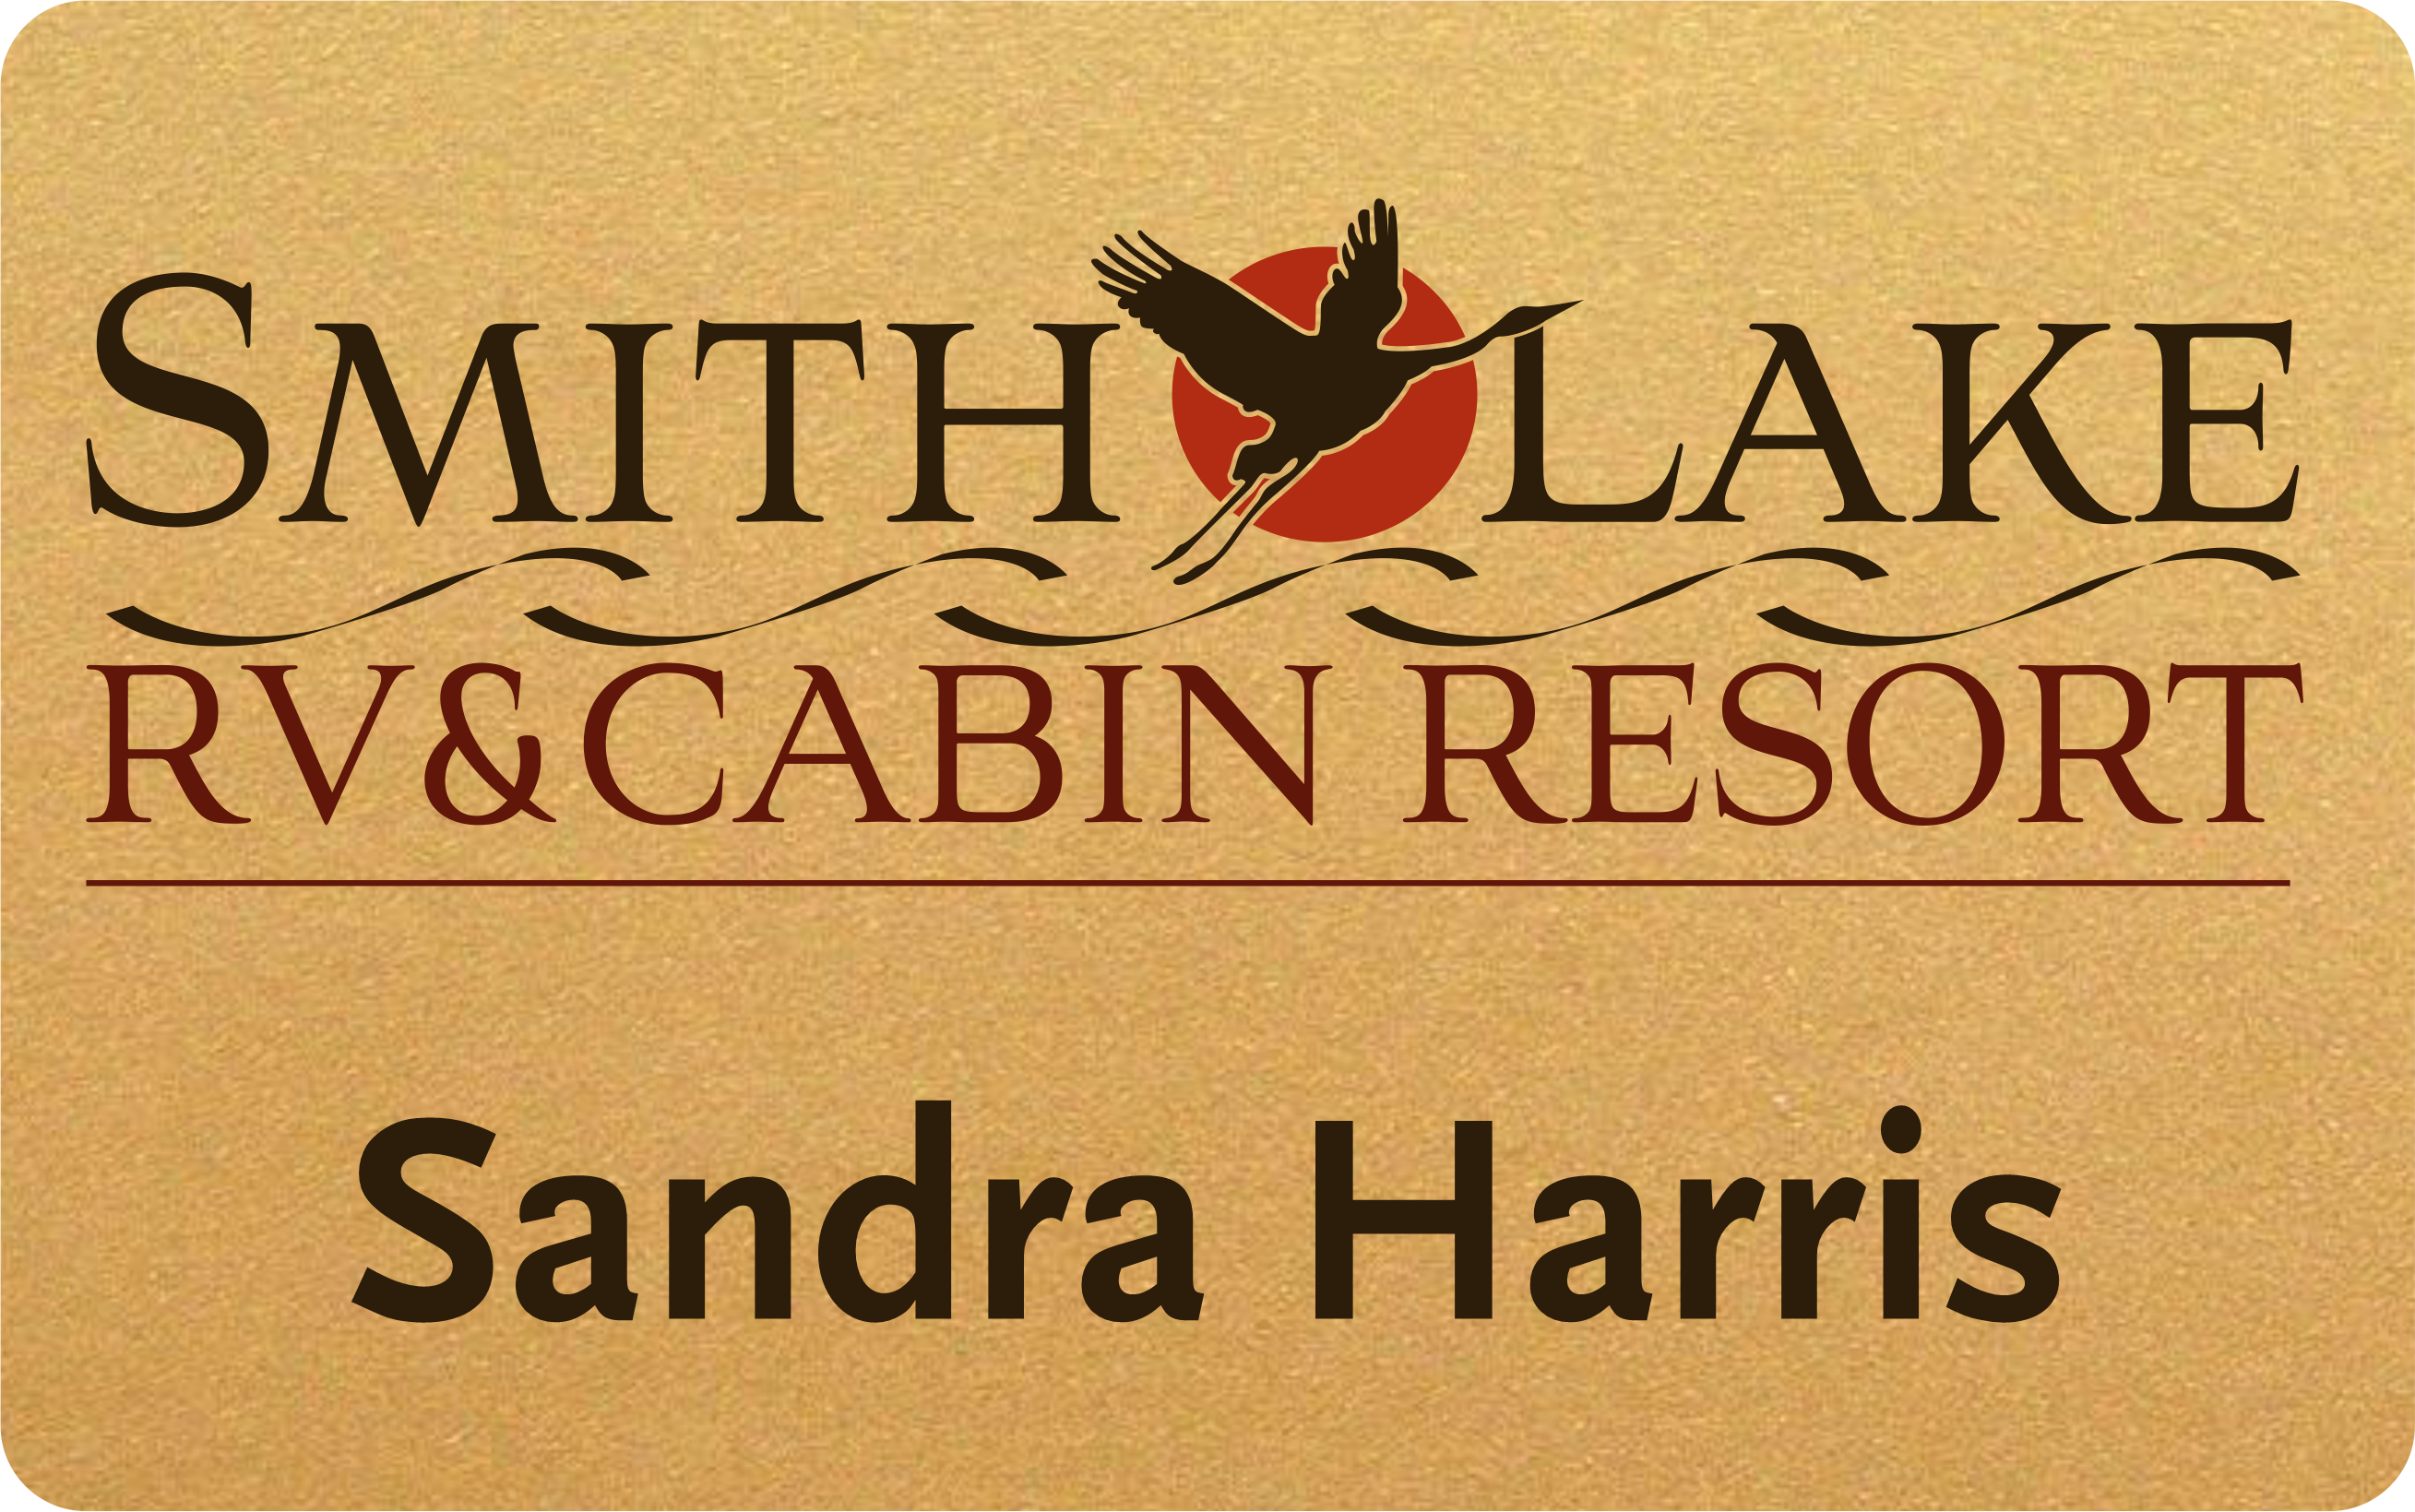 Name badge featuring logo for Smith Lake RV & Cabin Resort